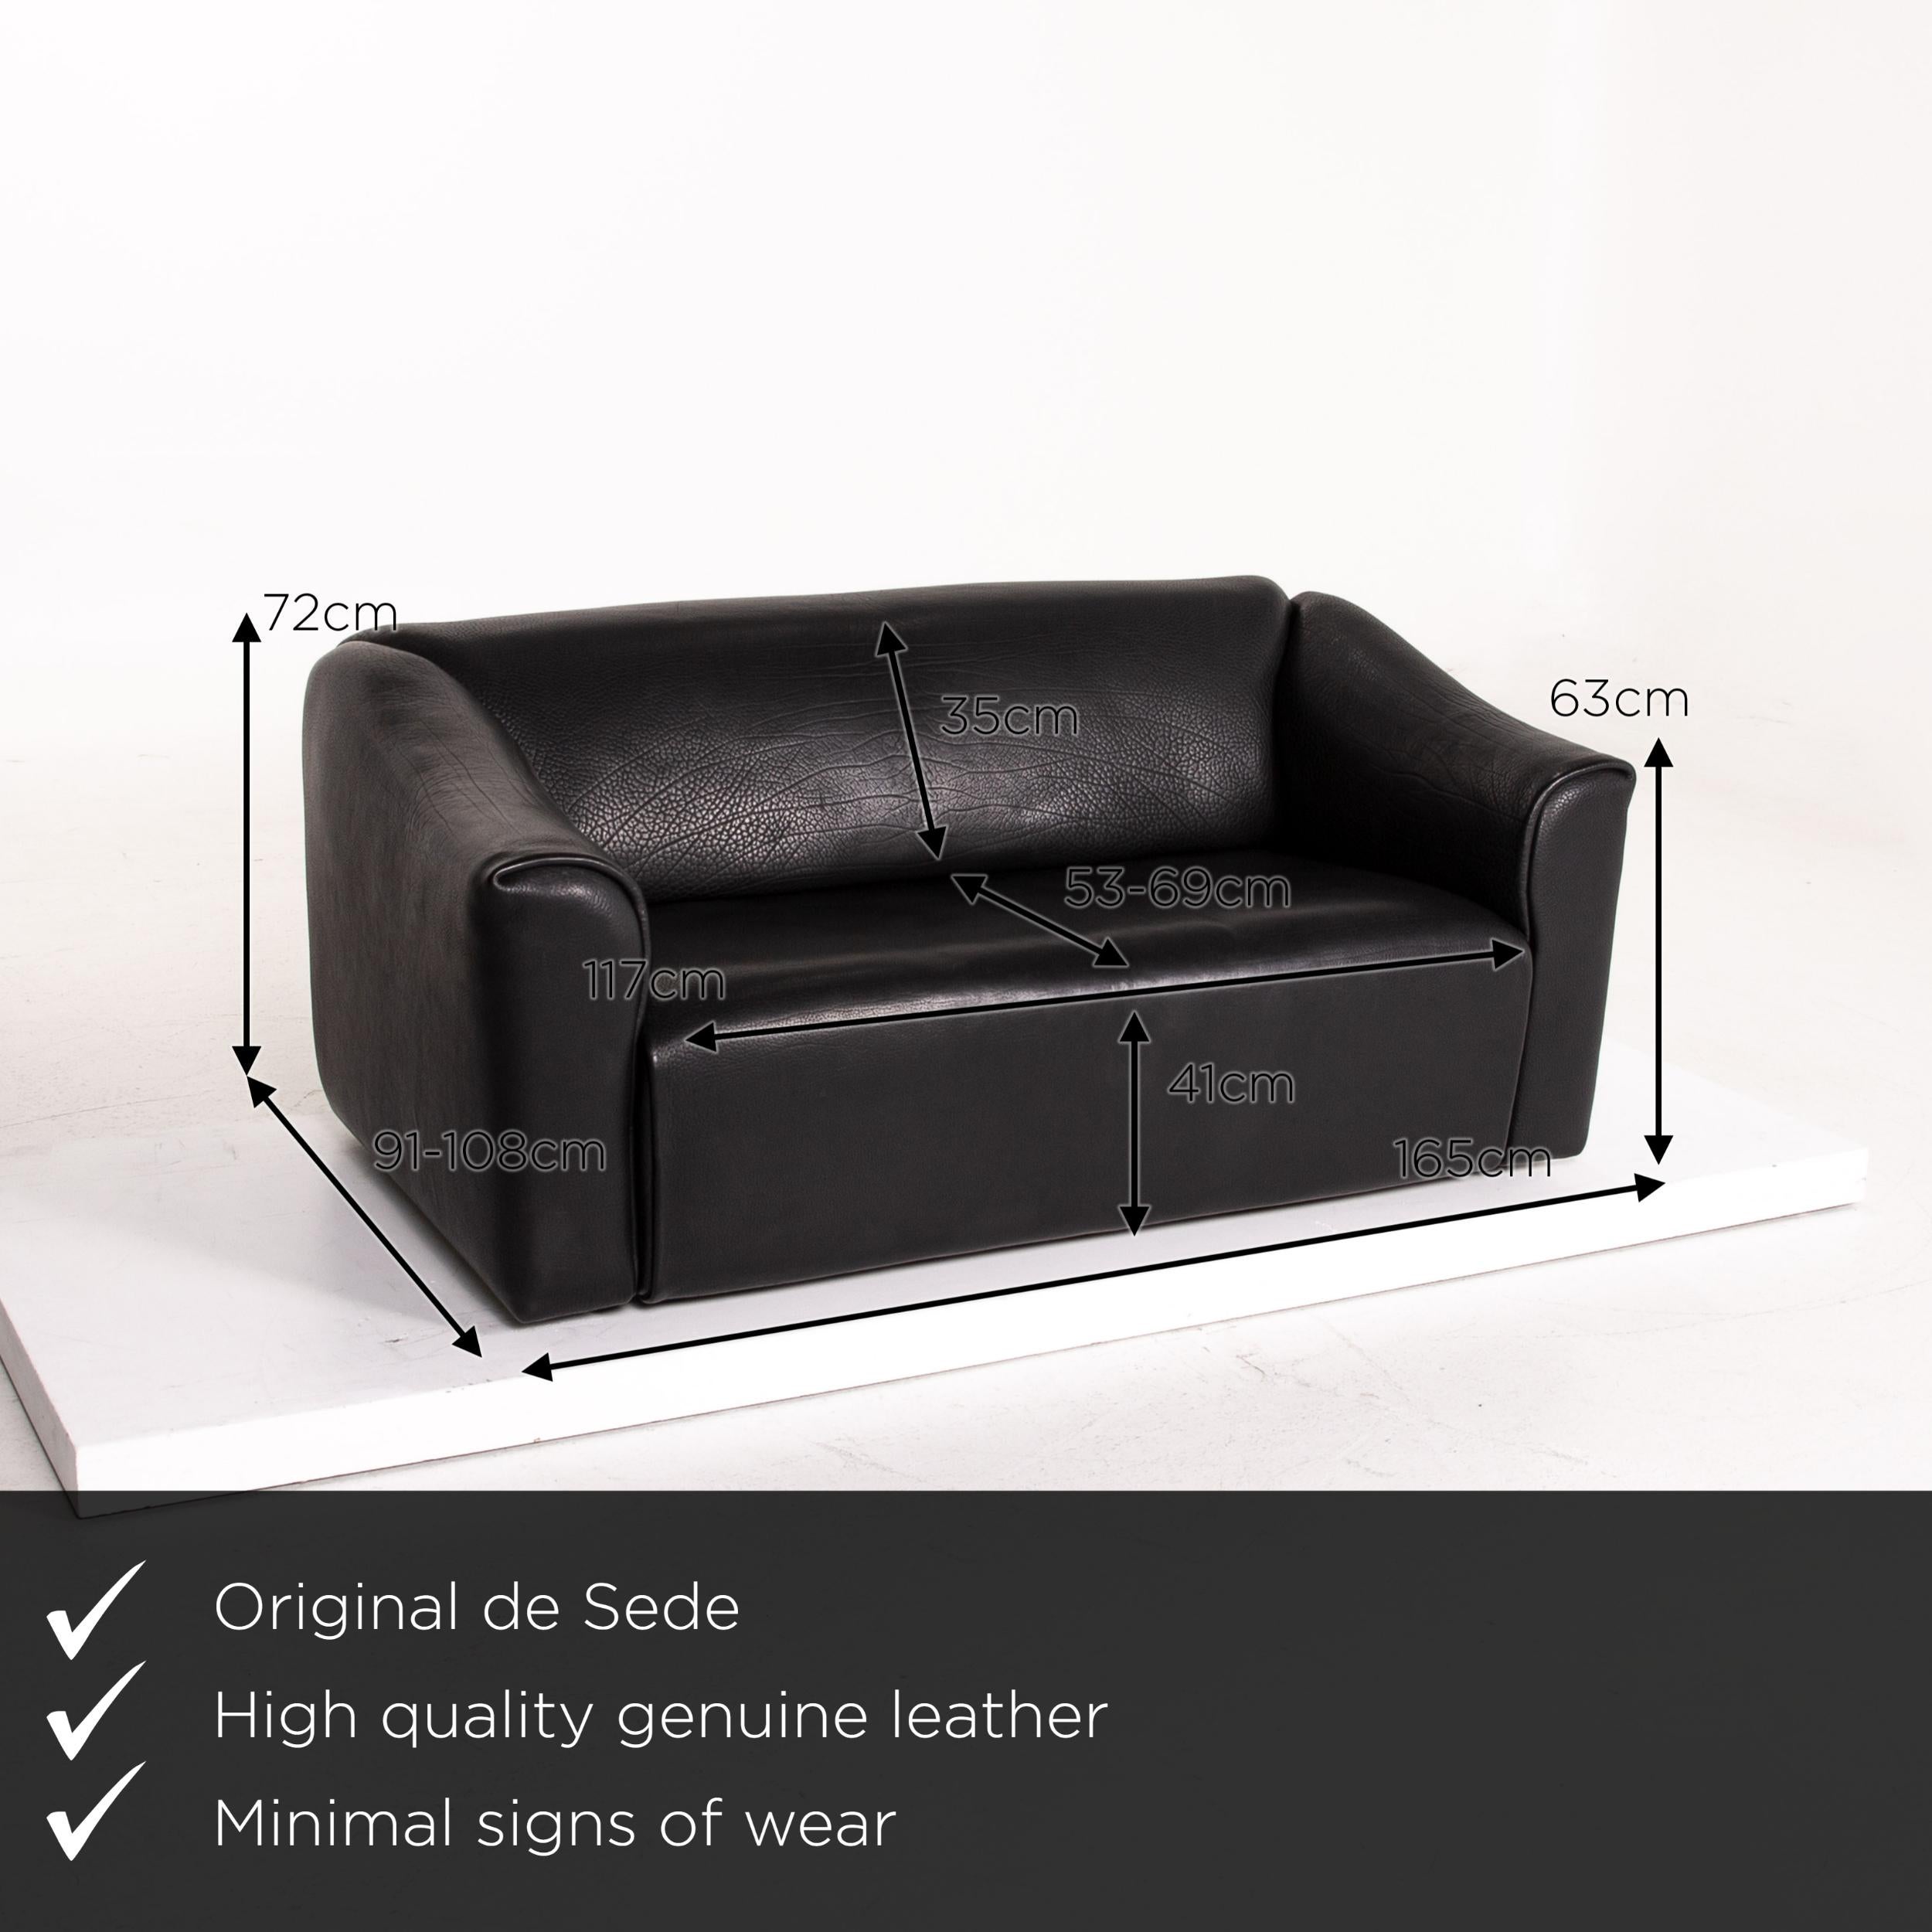 We present to you a De Sede DS 47 leather sofa black two-seat couch.
   
 

 Product measurements in centimeters:
 

Depth 91
Width 165
Height 72
Seat height 41
Rest height 63
Seat depth 53
Seat width 117
Back height 35.